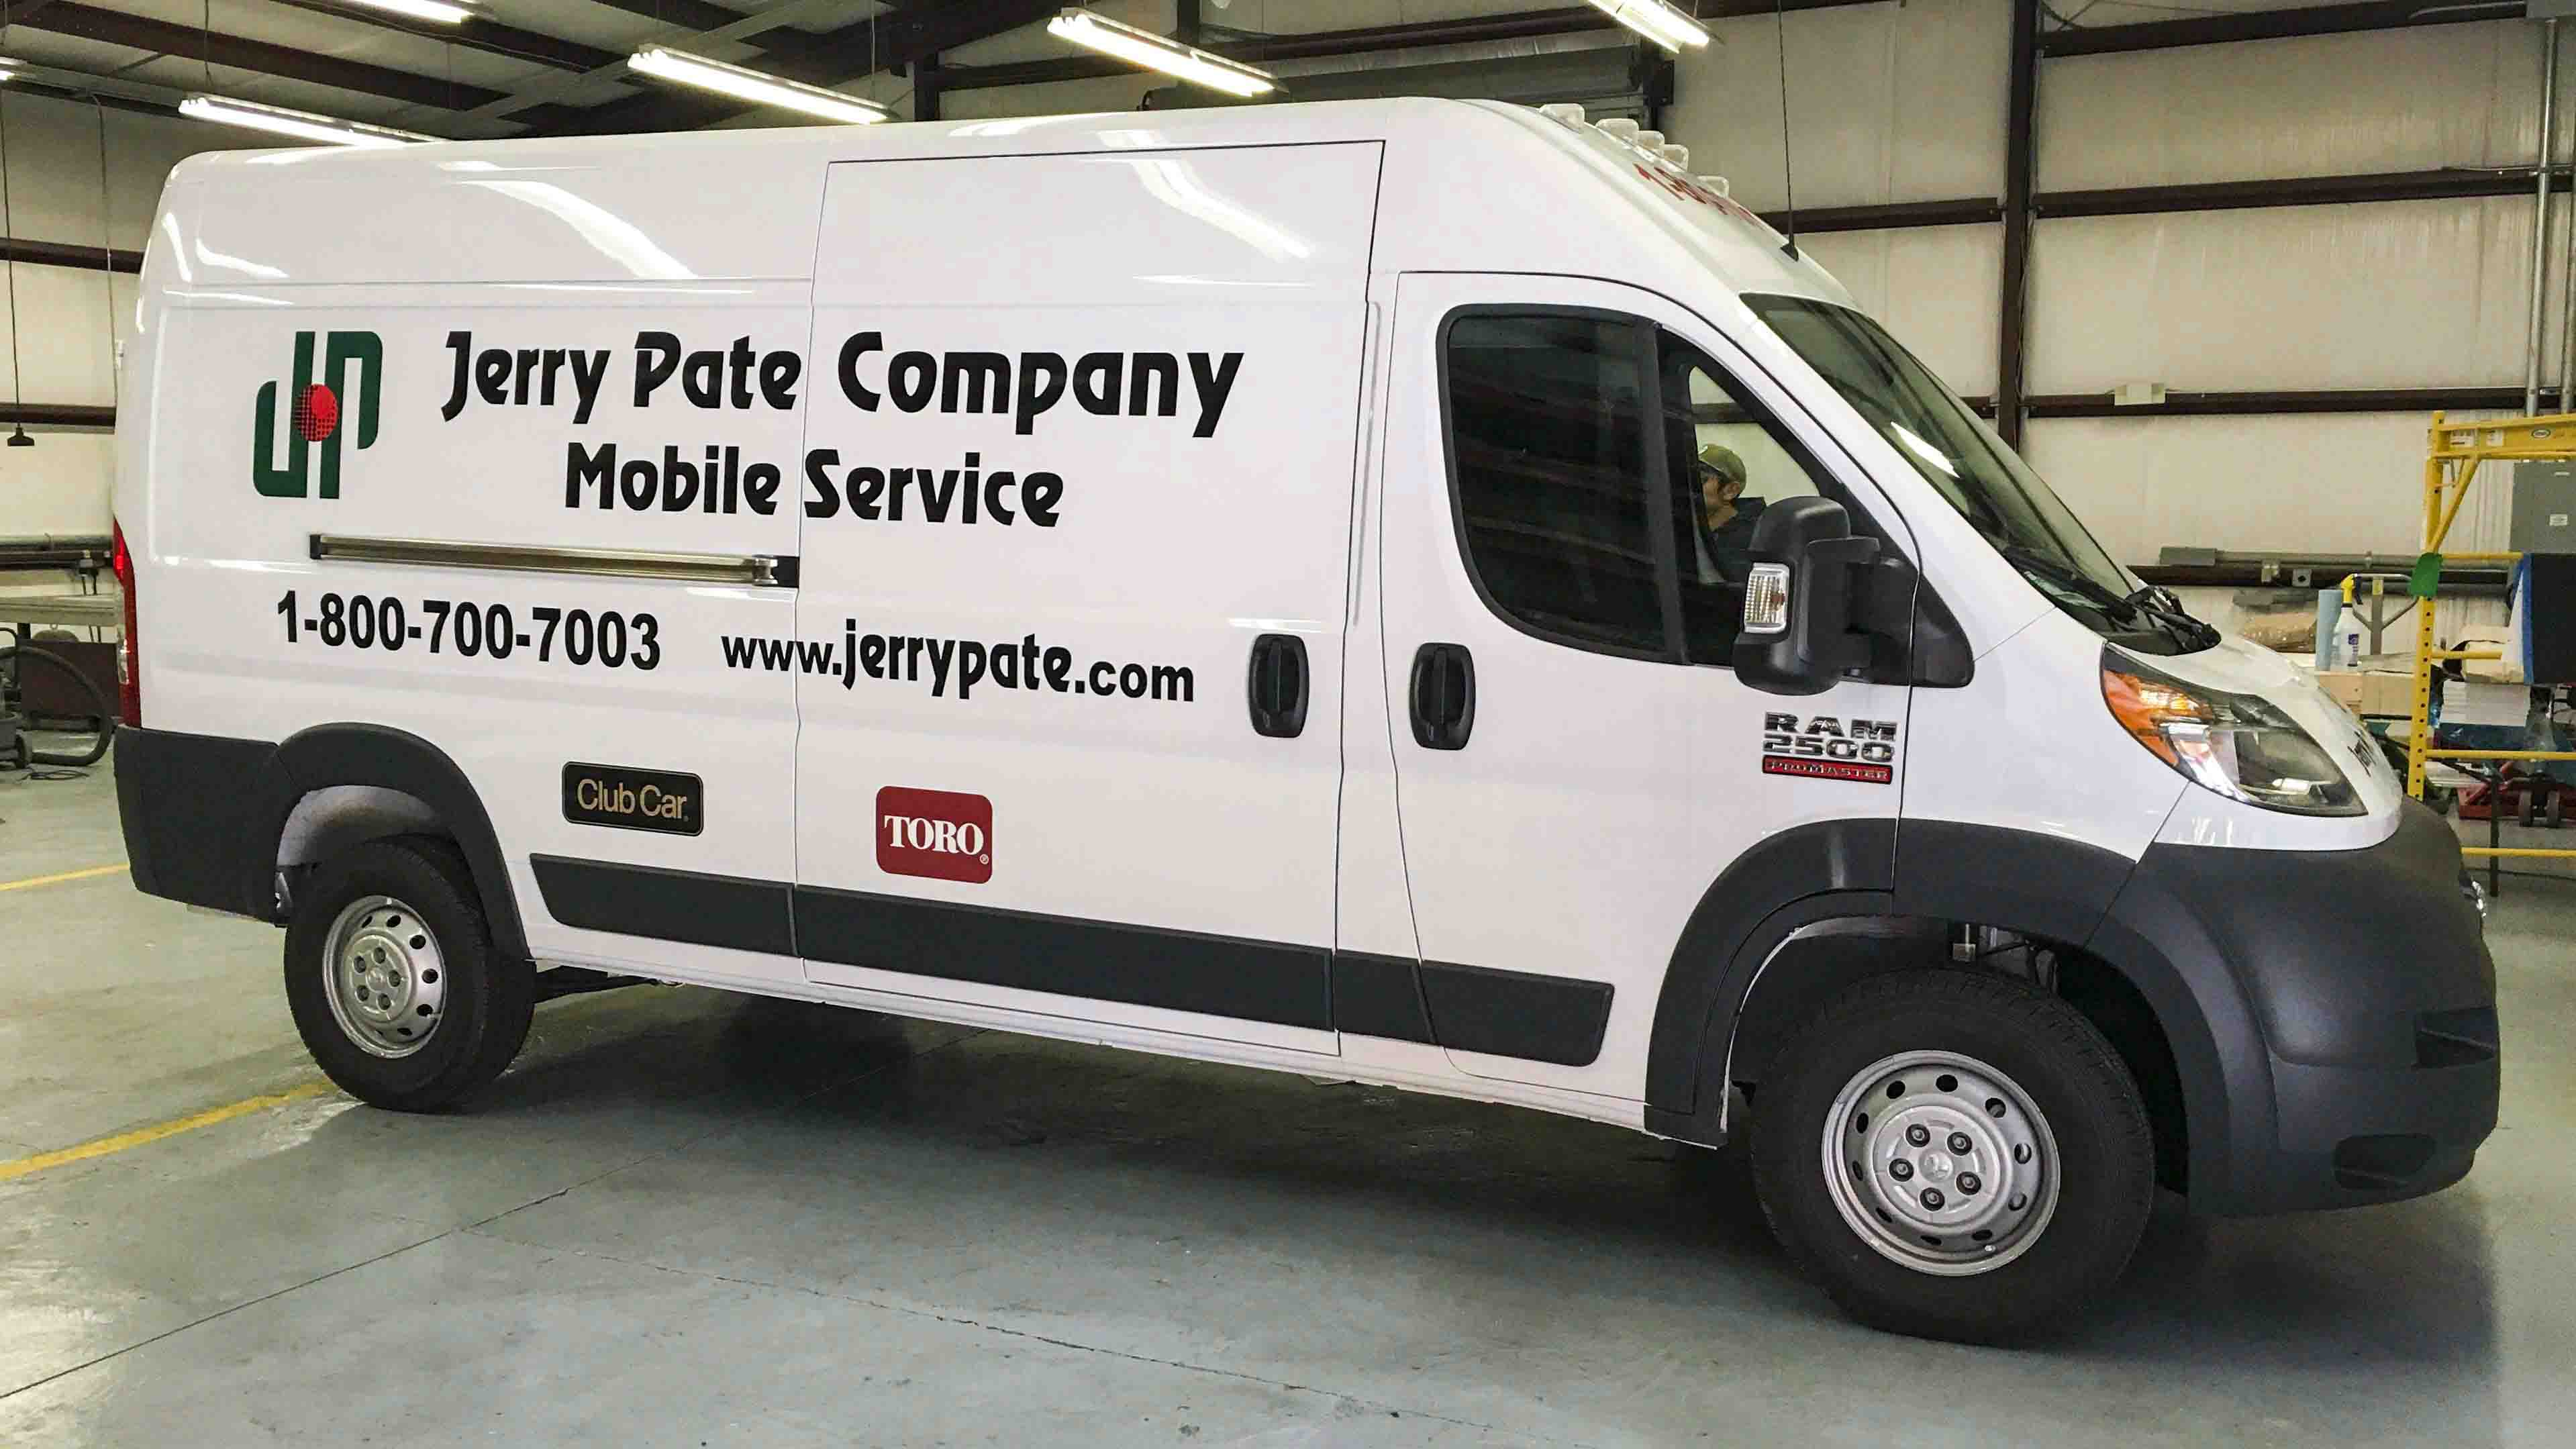 Pensacola Sign Vehicle Graphics - Graphics for Jerry Pate Company Van